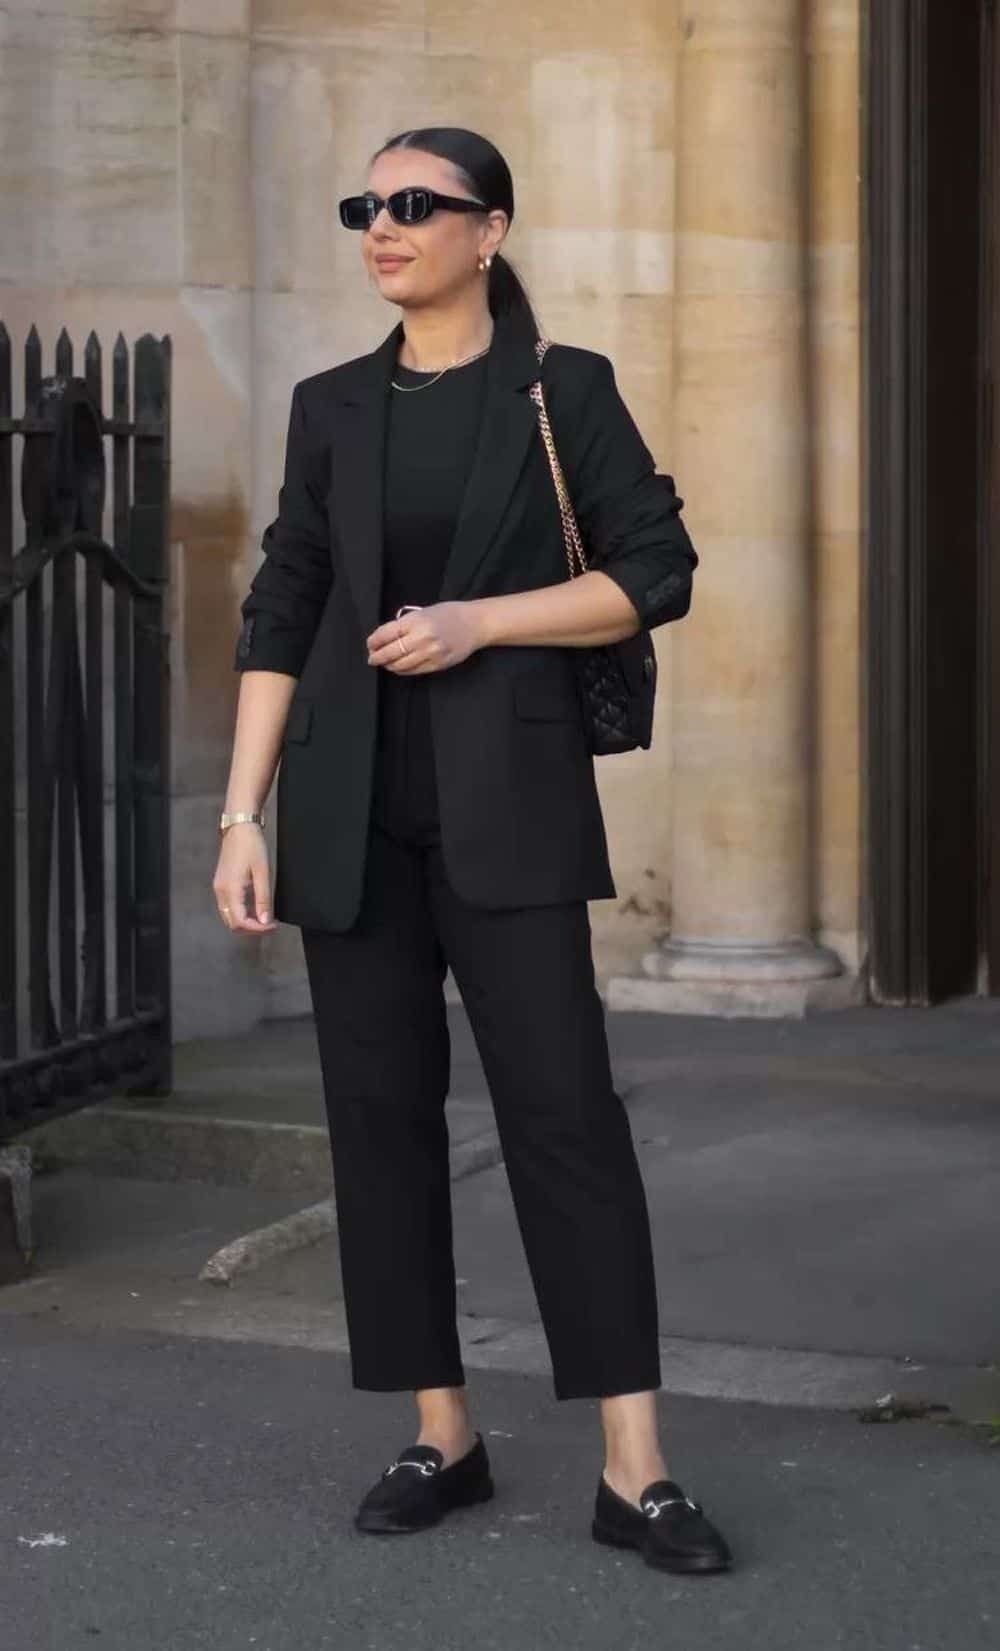 image of a woman in a black blazer, black top, black trousers, and black shoes